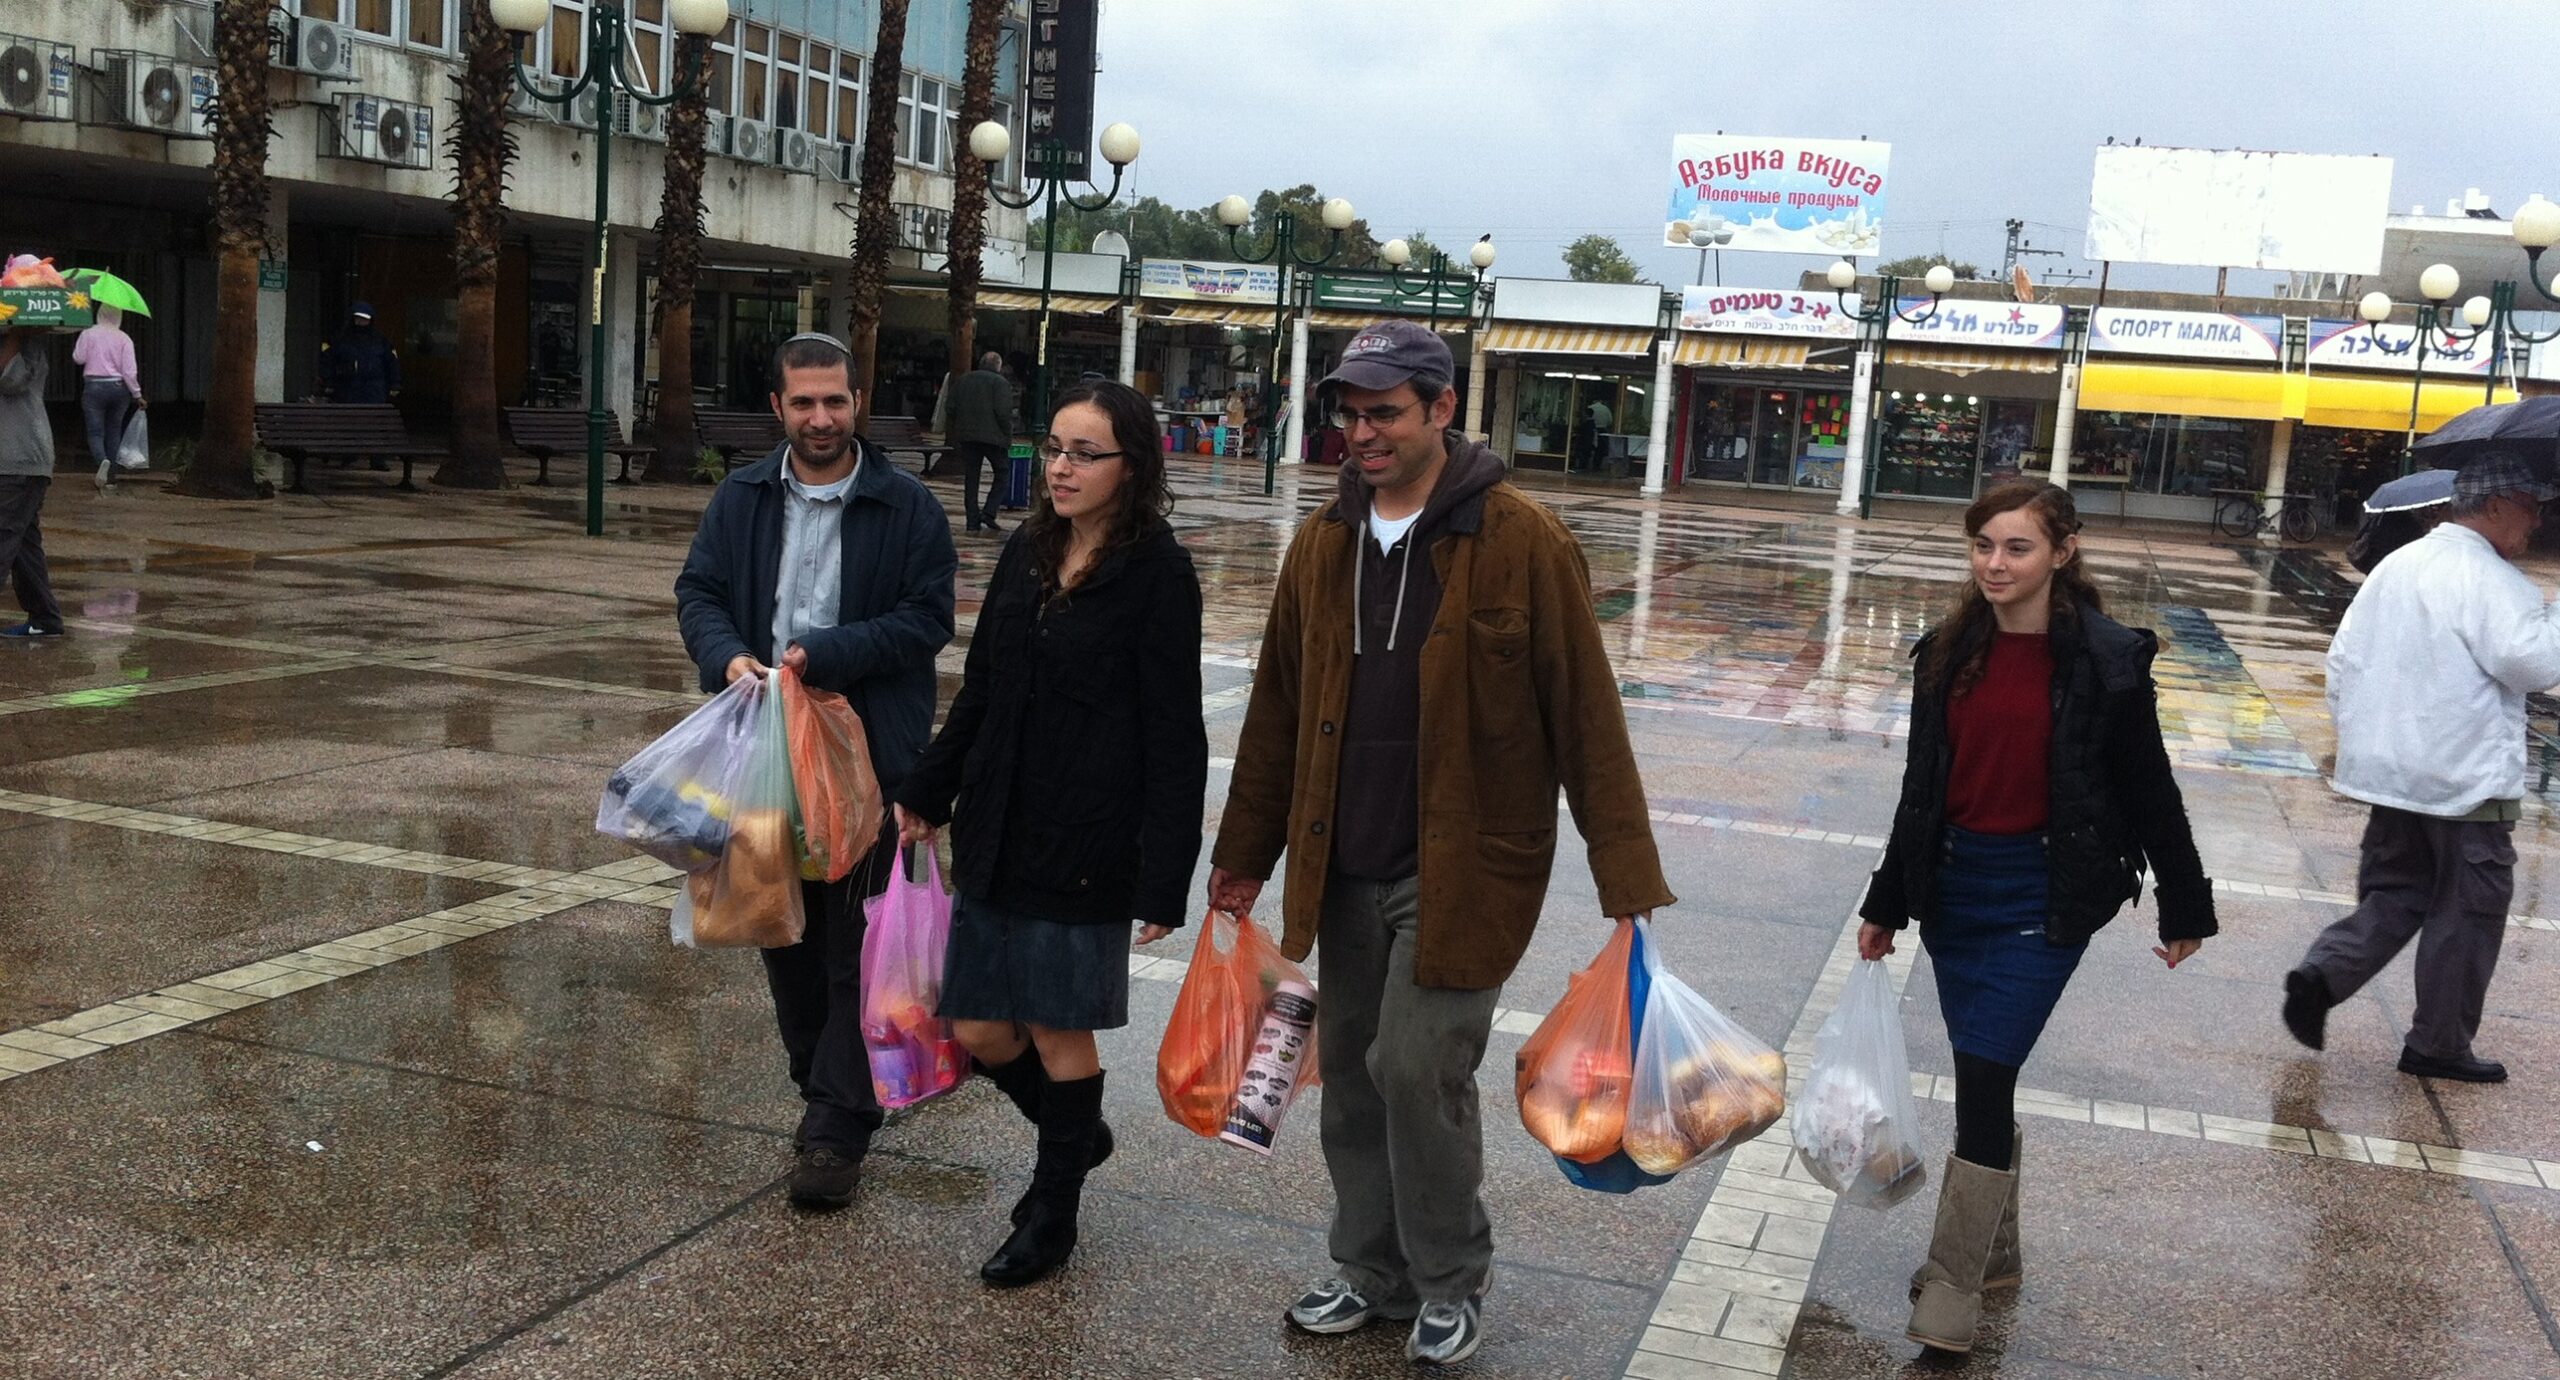 Gesher organization sent a group of people to help Ashdod businesses get back on their feet.